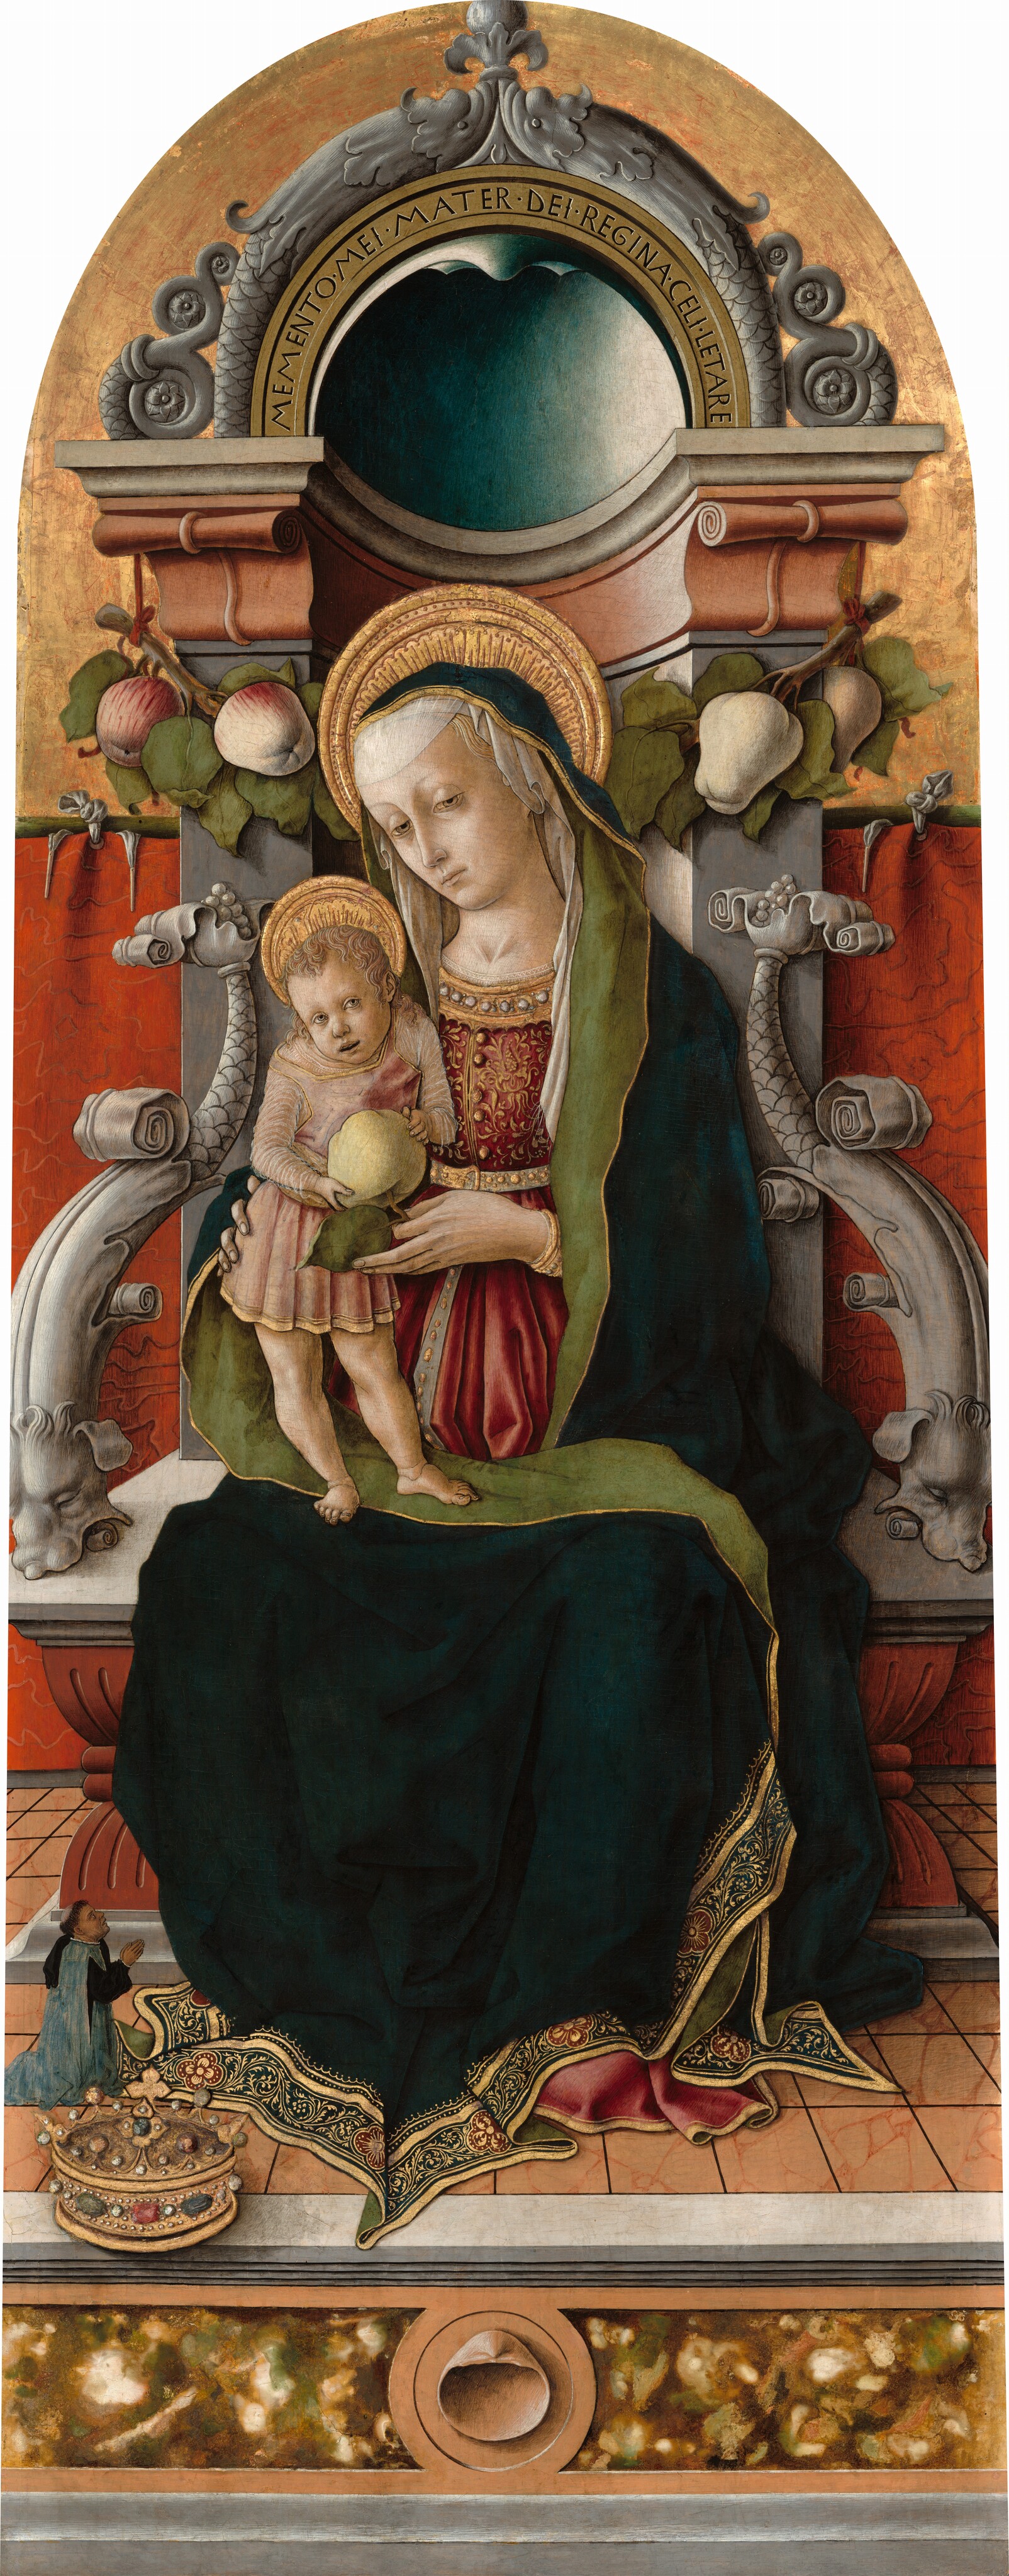 Carlo Crivelli, Madonna and Child Enthroned with Donor, 1470, National Gallery of Art, Washington, DC, USA. 